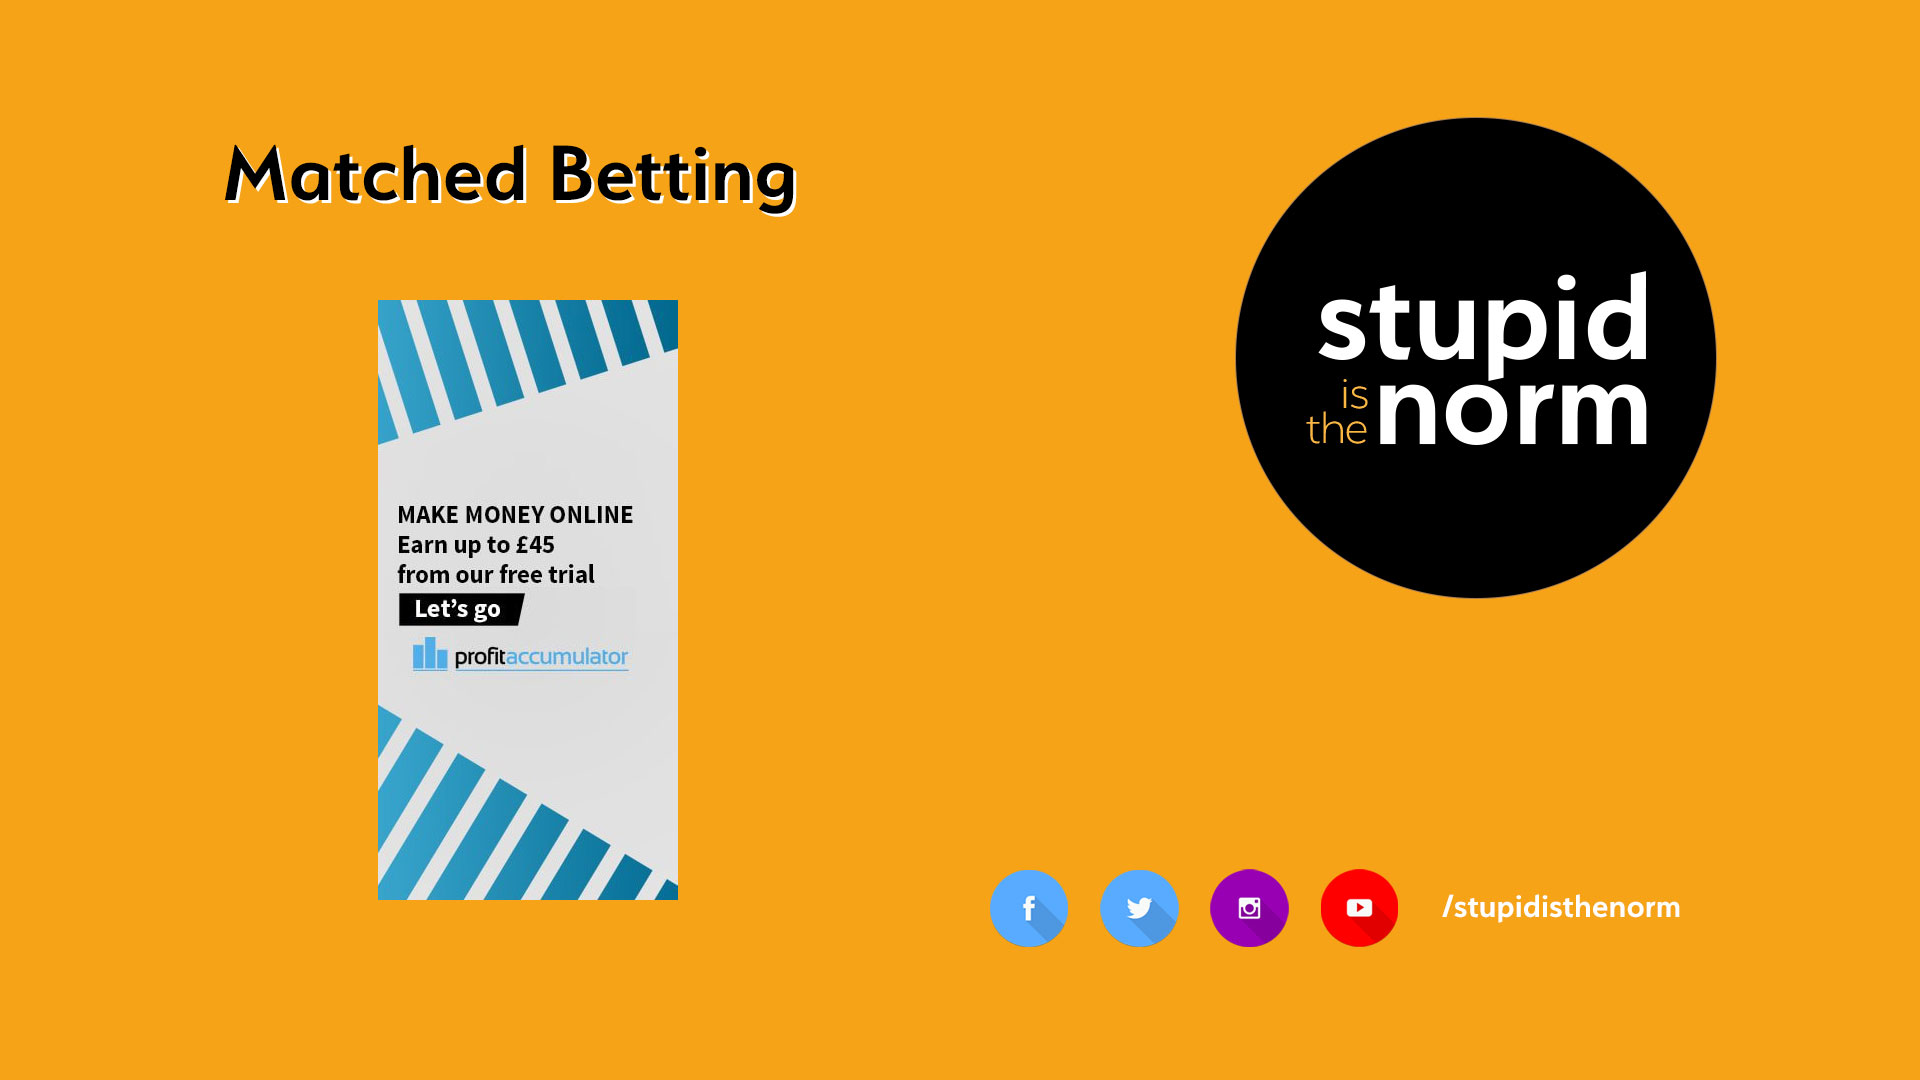 No risk matched betting sites